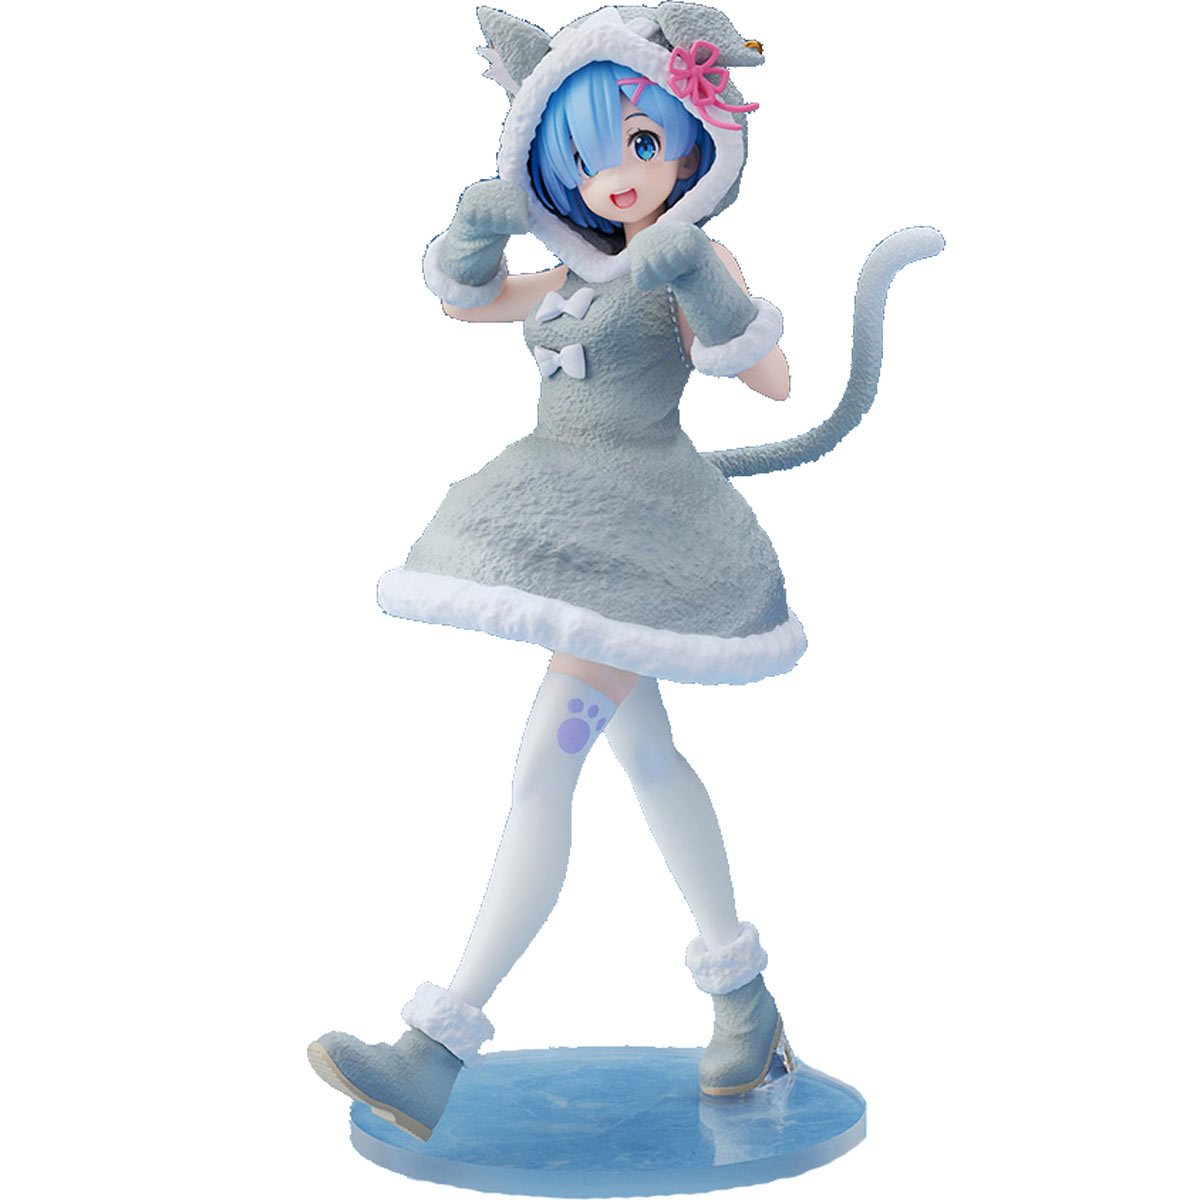 Re:Zero - Starting Life in Another World Rem Puck Image Ver. Coreful Statue Figure